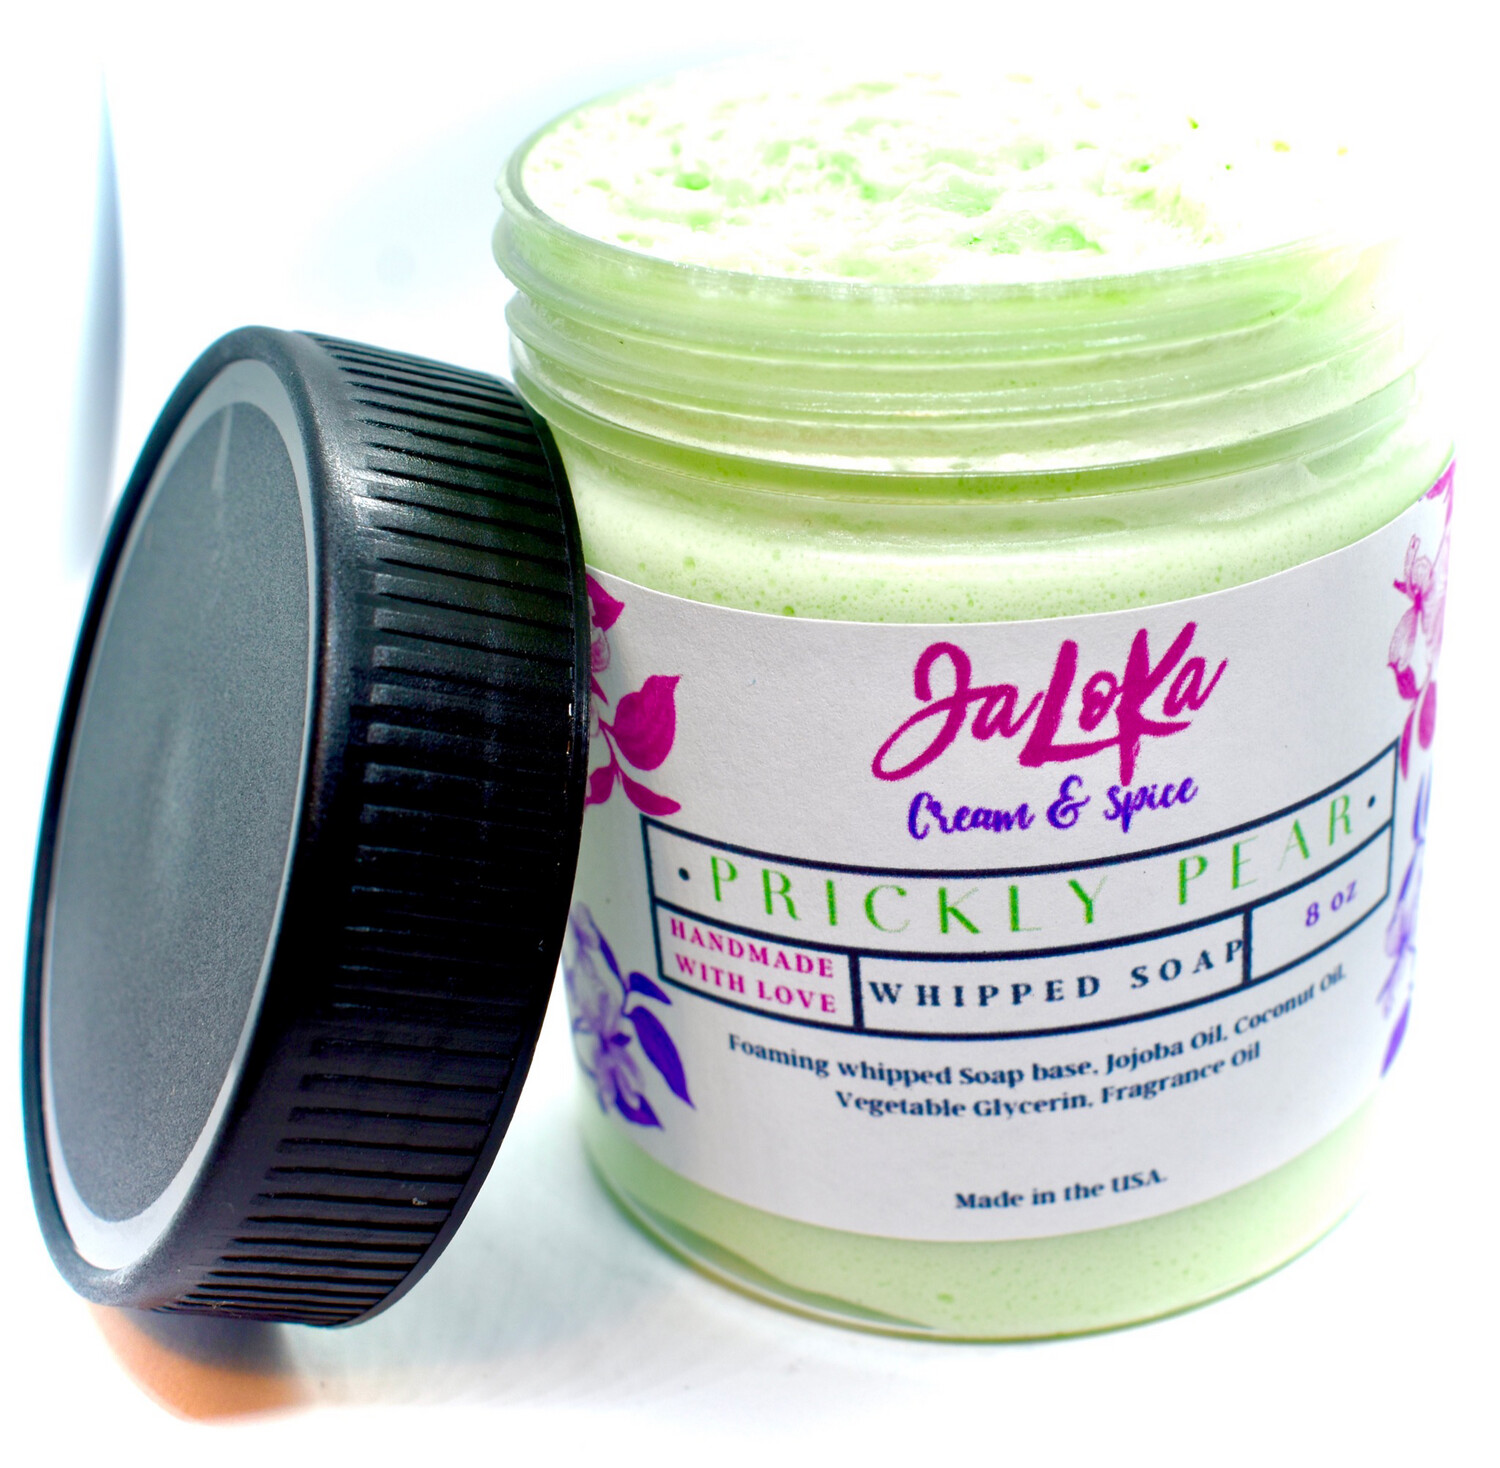 Prickly Pear Whipped Soap